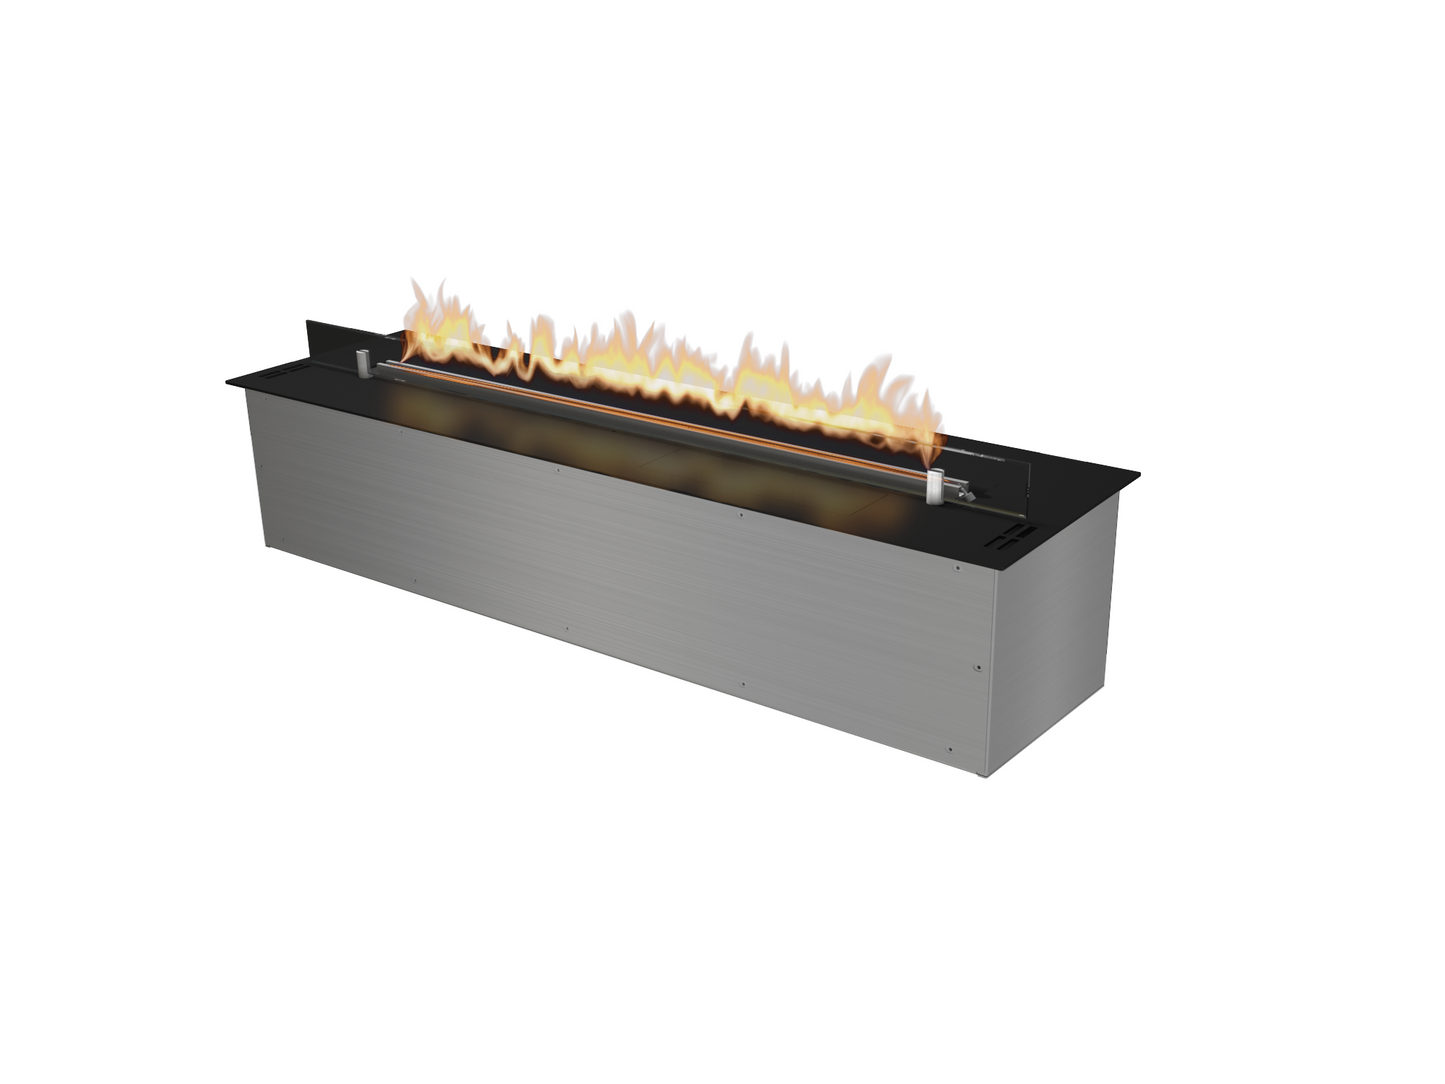 Planika - Insert fireplace - FORMA 1200 IS WITH PRIME FIRE 990